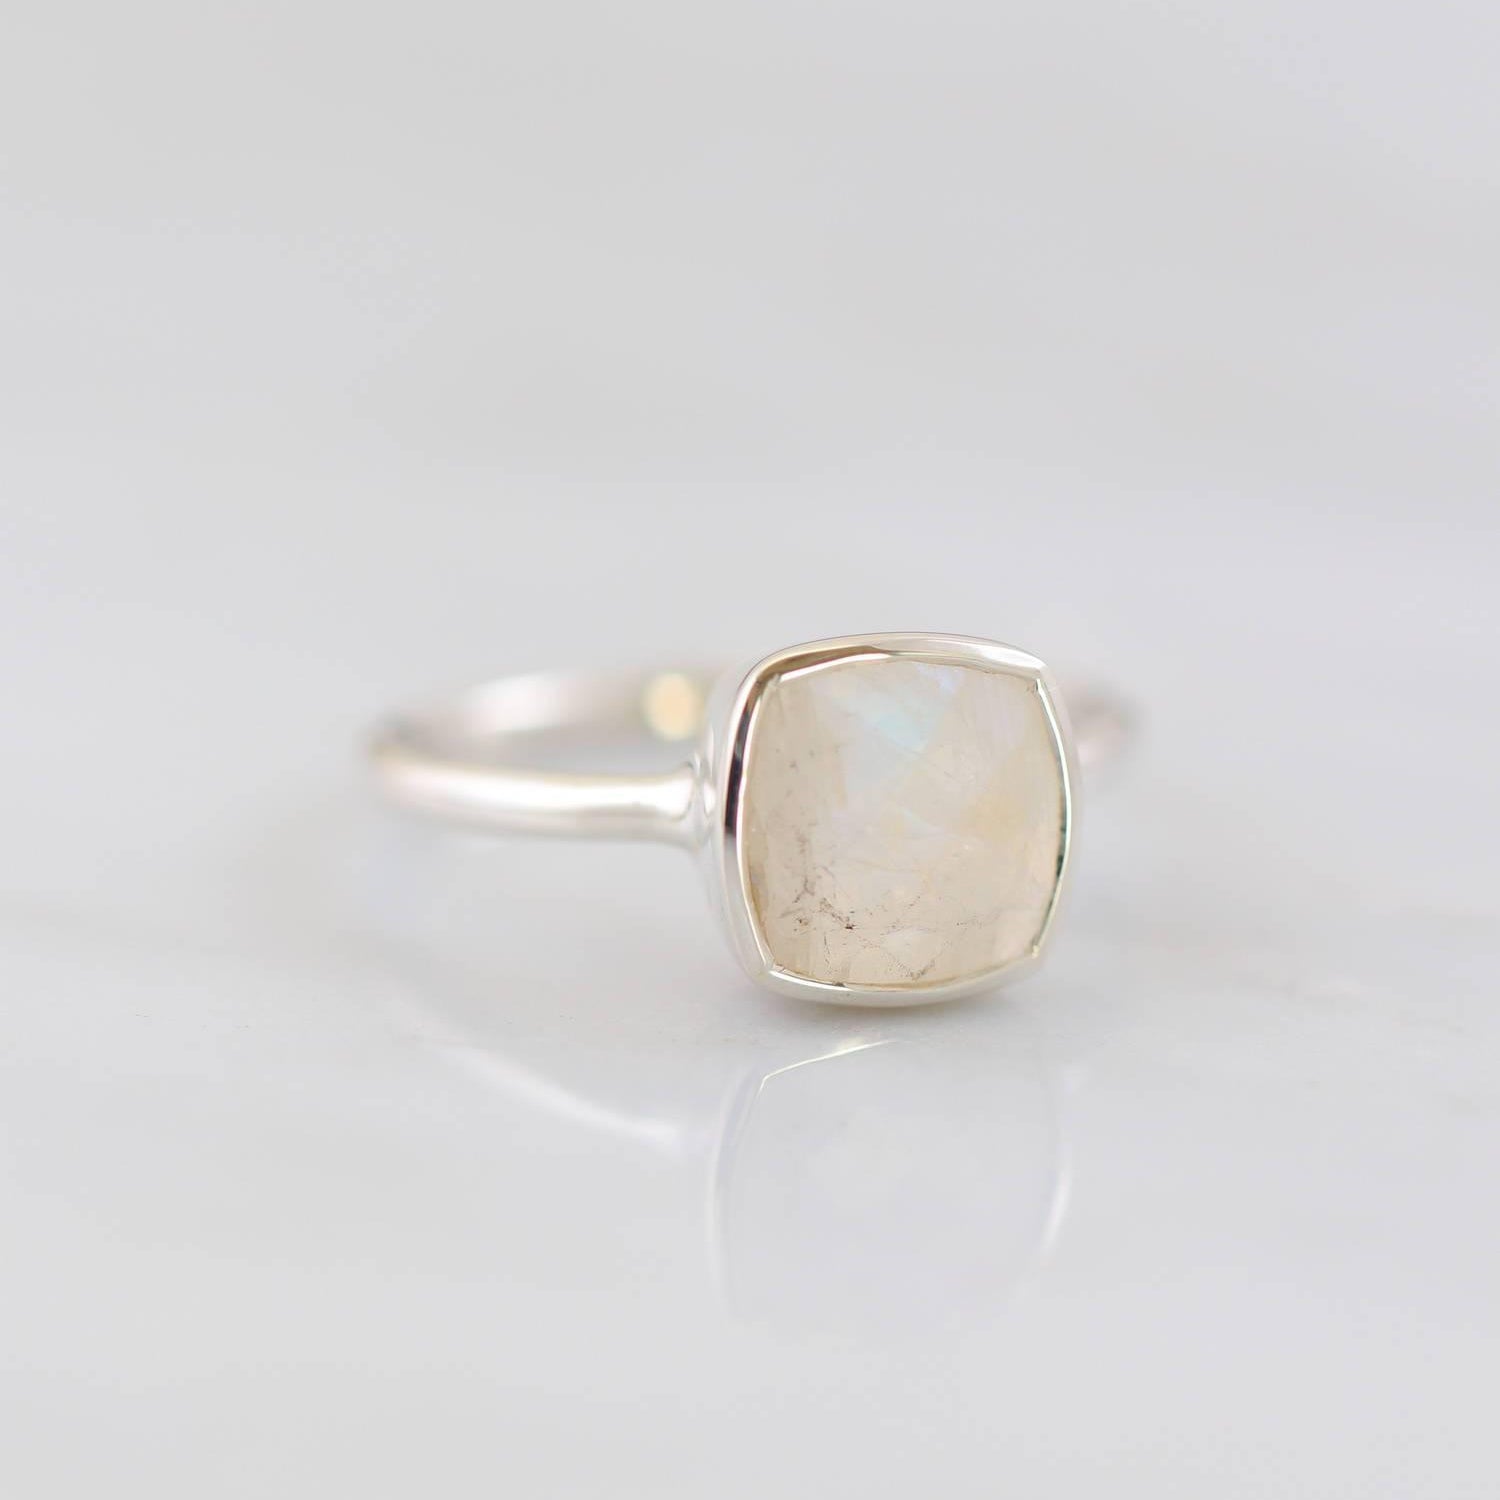 Moonstone Ring, Rainbow moonstone ring, Square ring, June Birthstone ring, Sterling silver Jewelry, Bezel set ring, Valentine's Gift for her